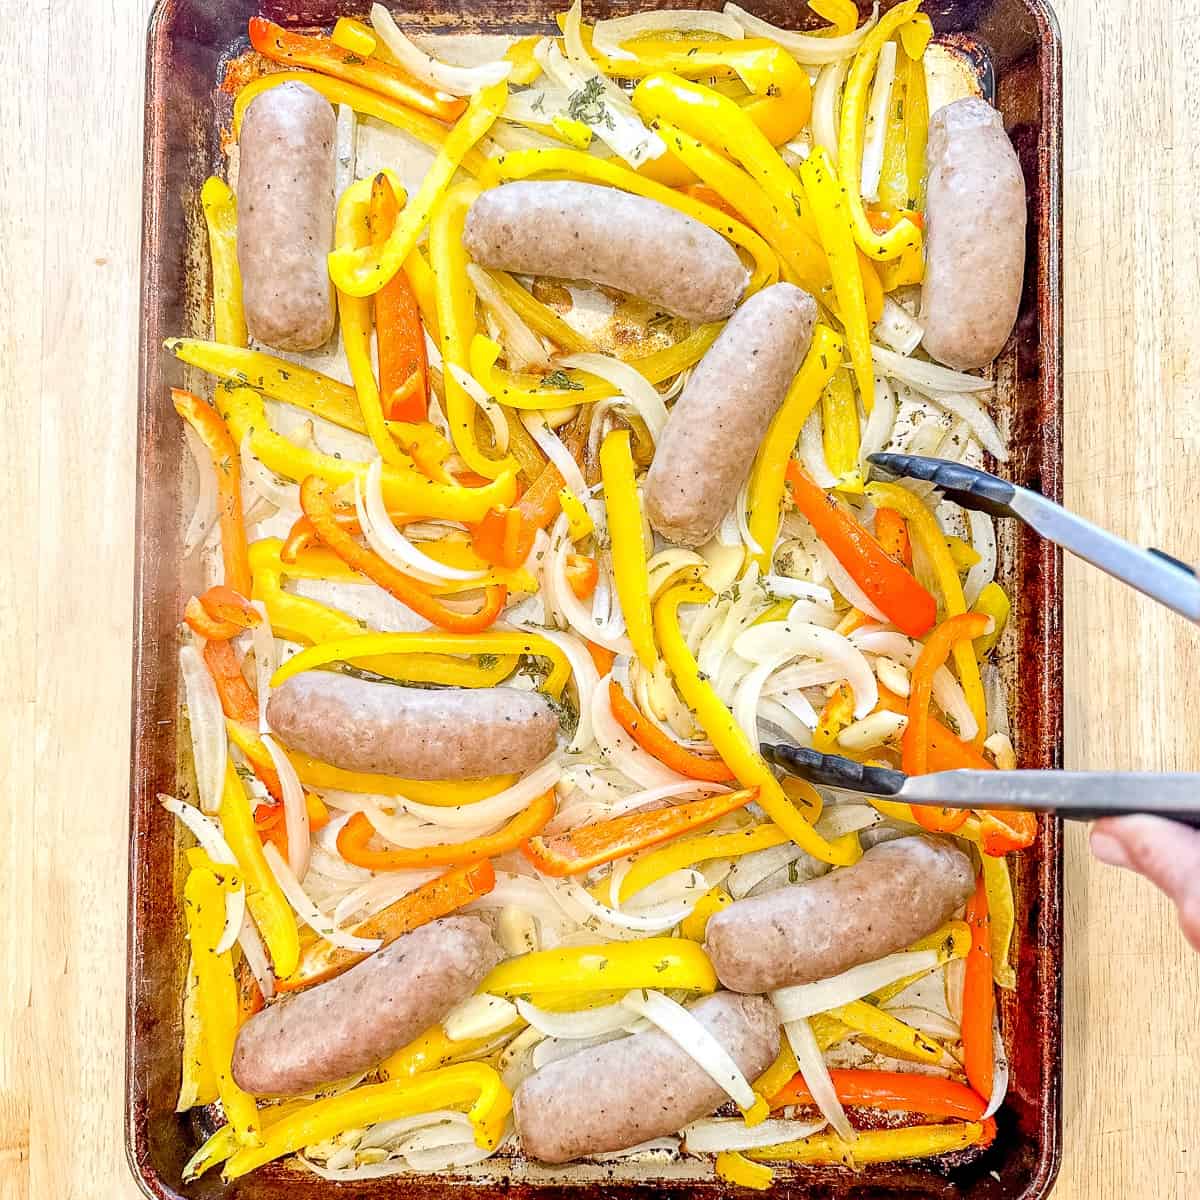 Sheet pan containing partially roasted sausage and peppers being turned.